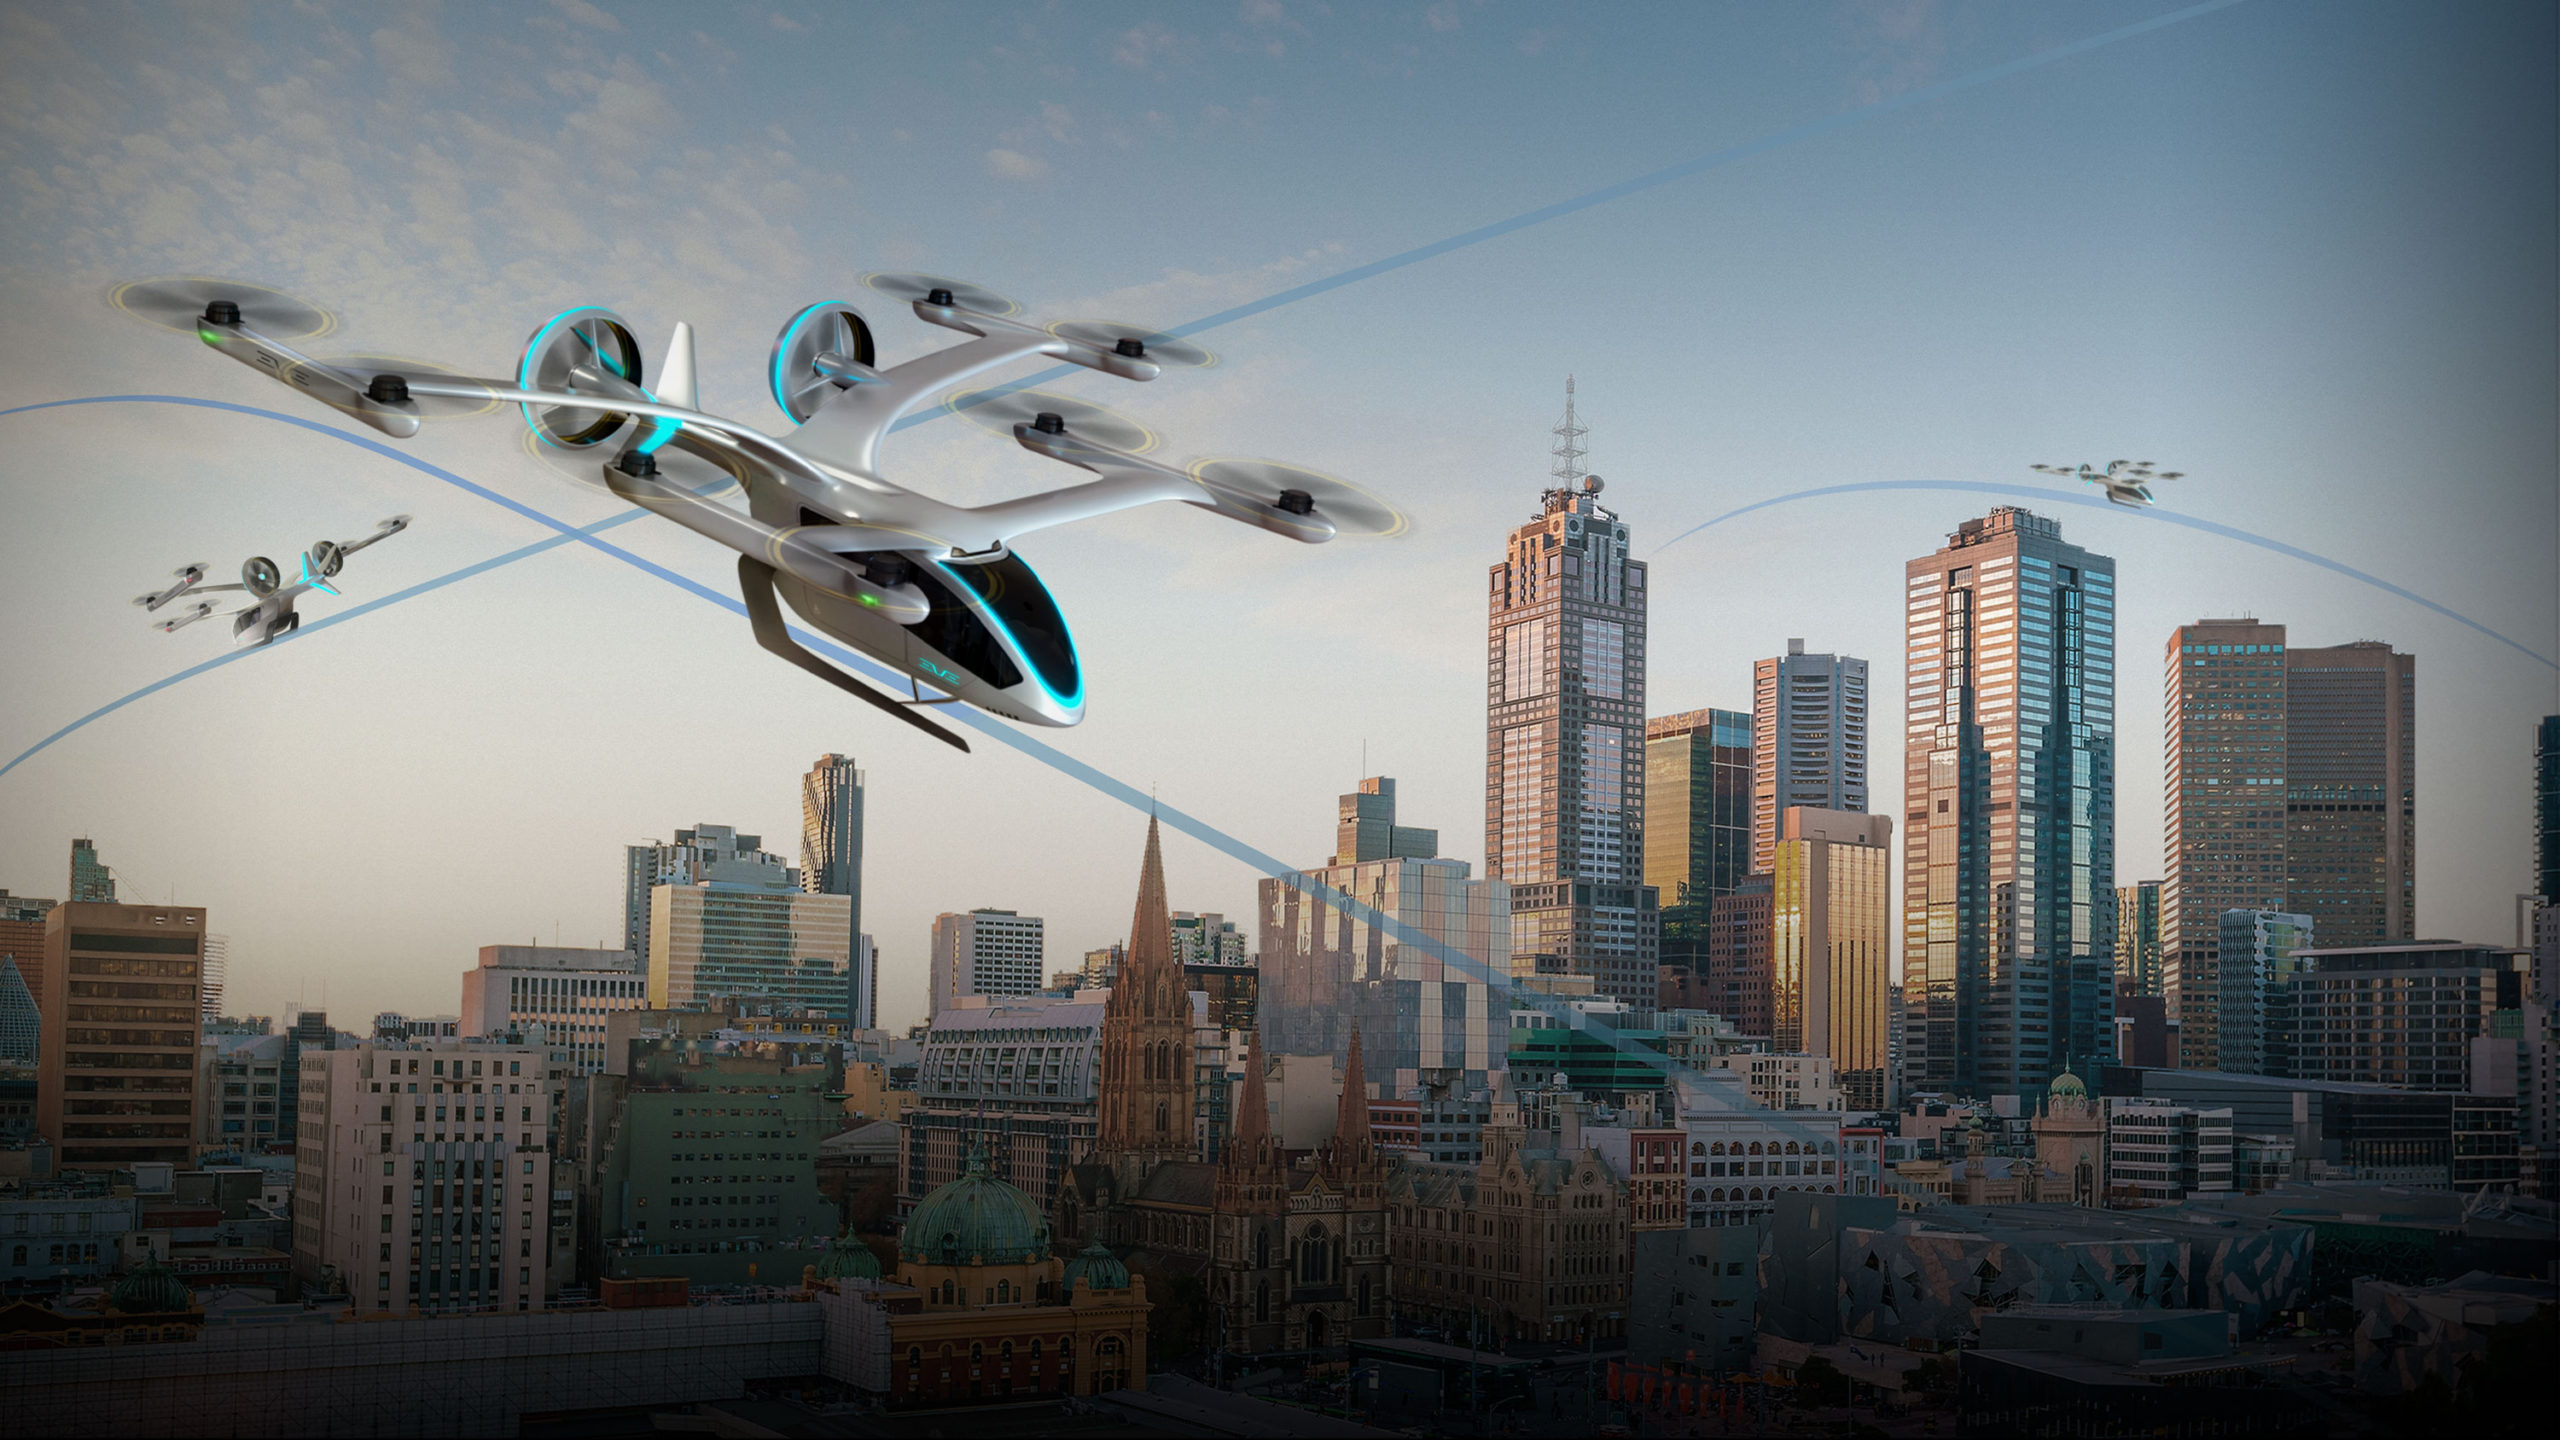 EmbraerX, Atech and Harris Corporation collaborate to envision a new paradigm of air traffic management for urban air mobility